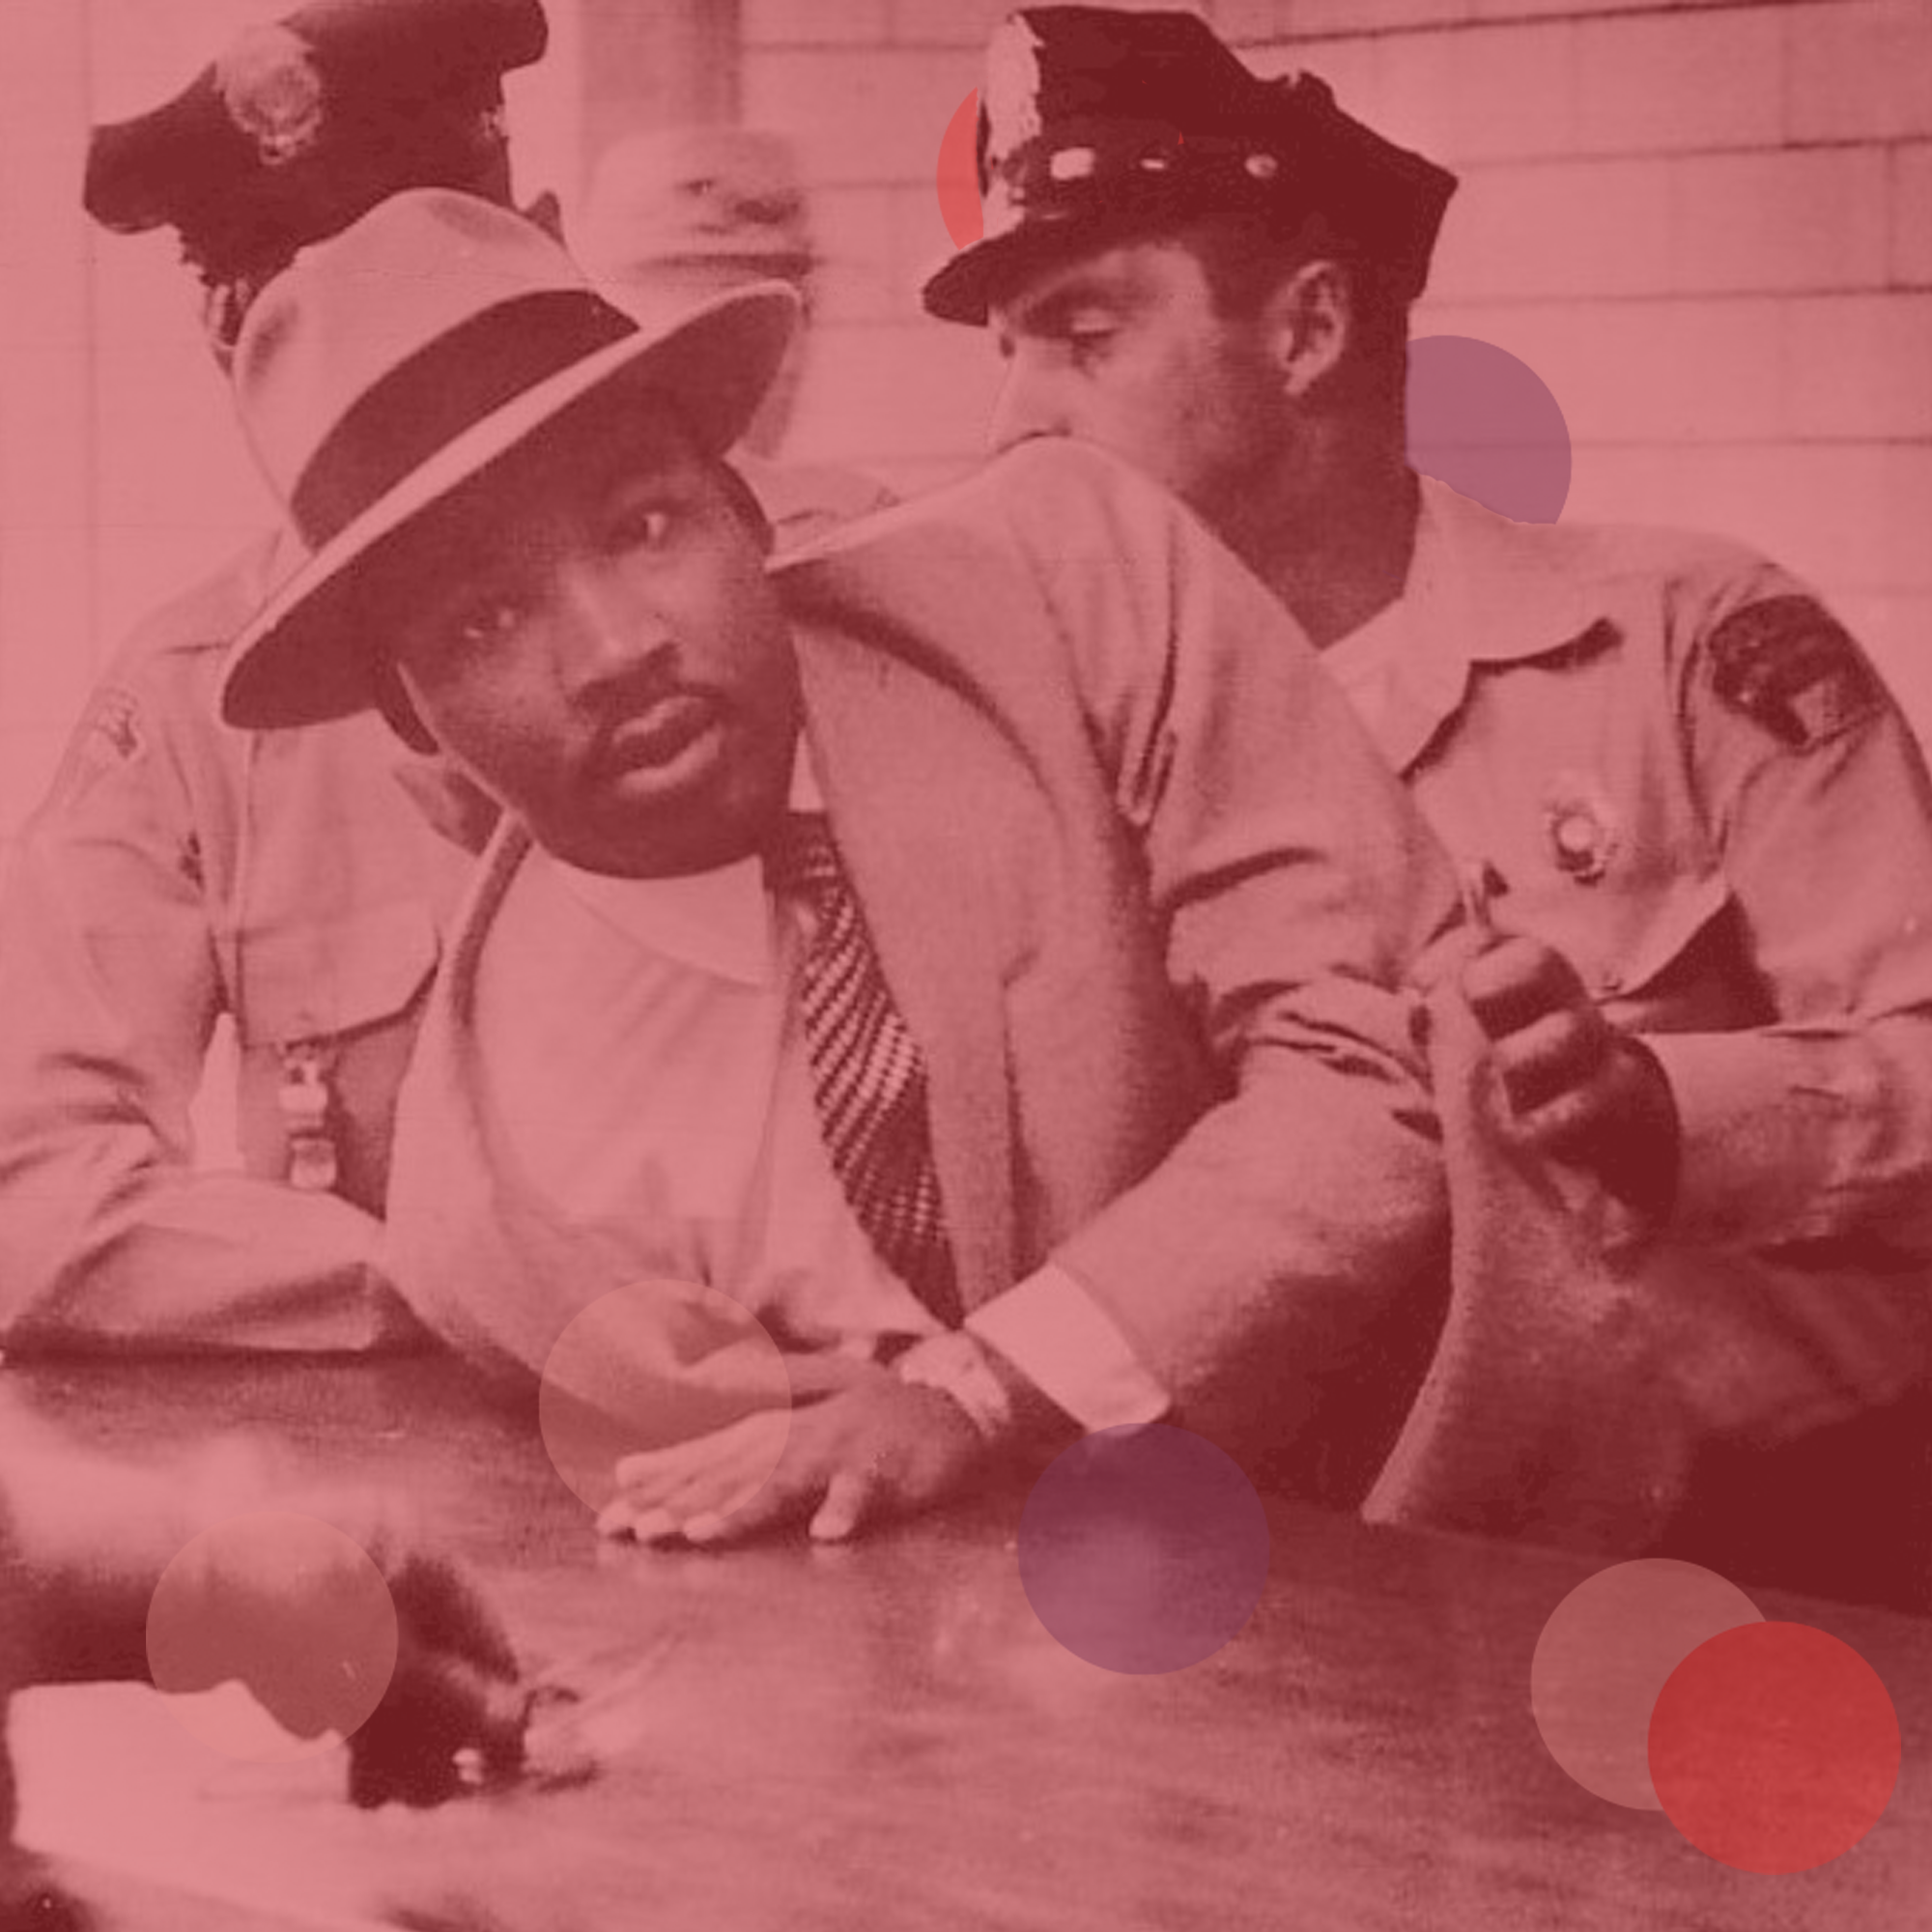 Which MLK Wrote “Letter from a Birmingham Jail”?